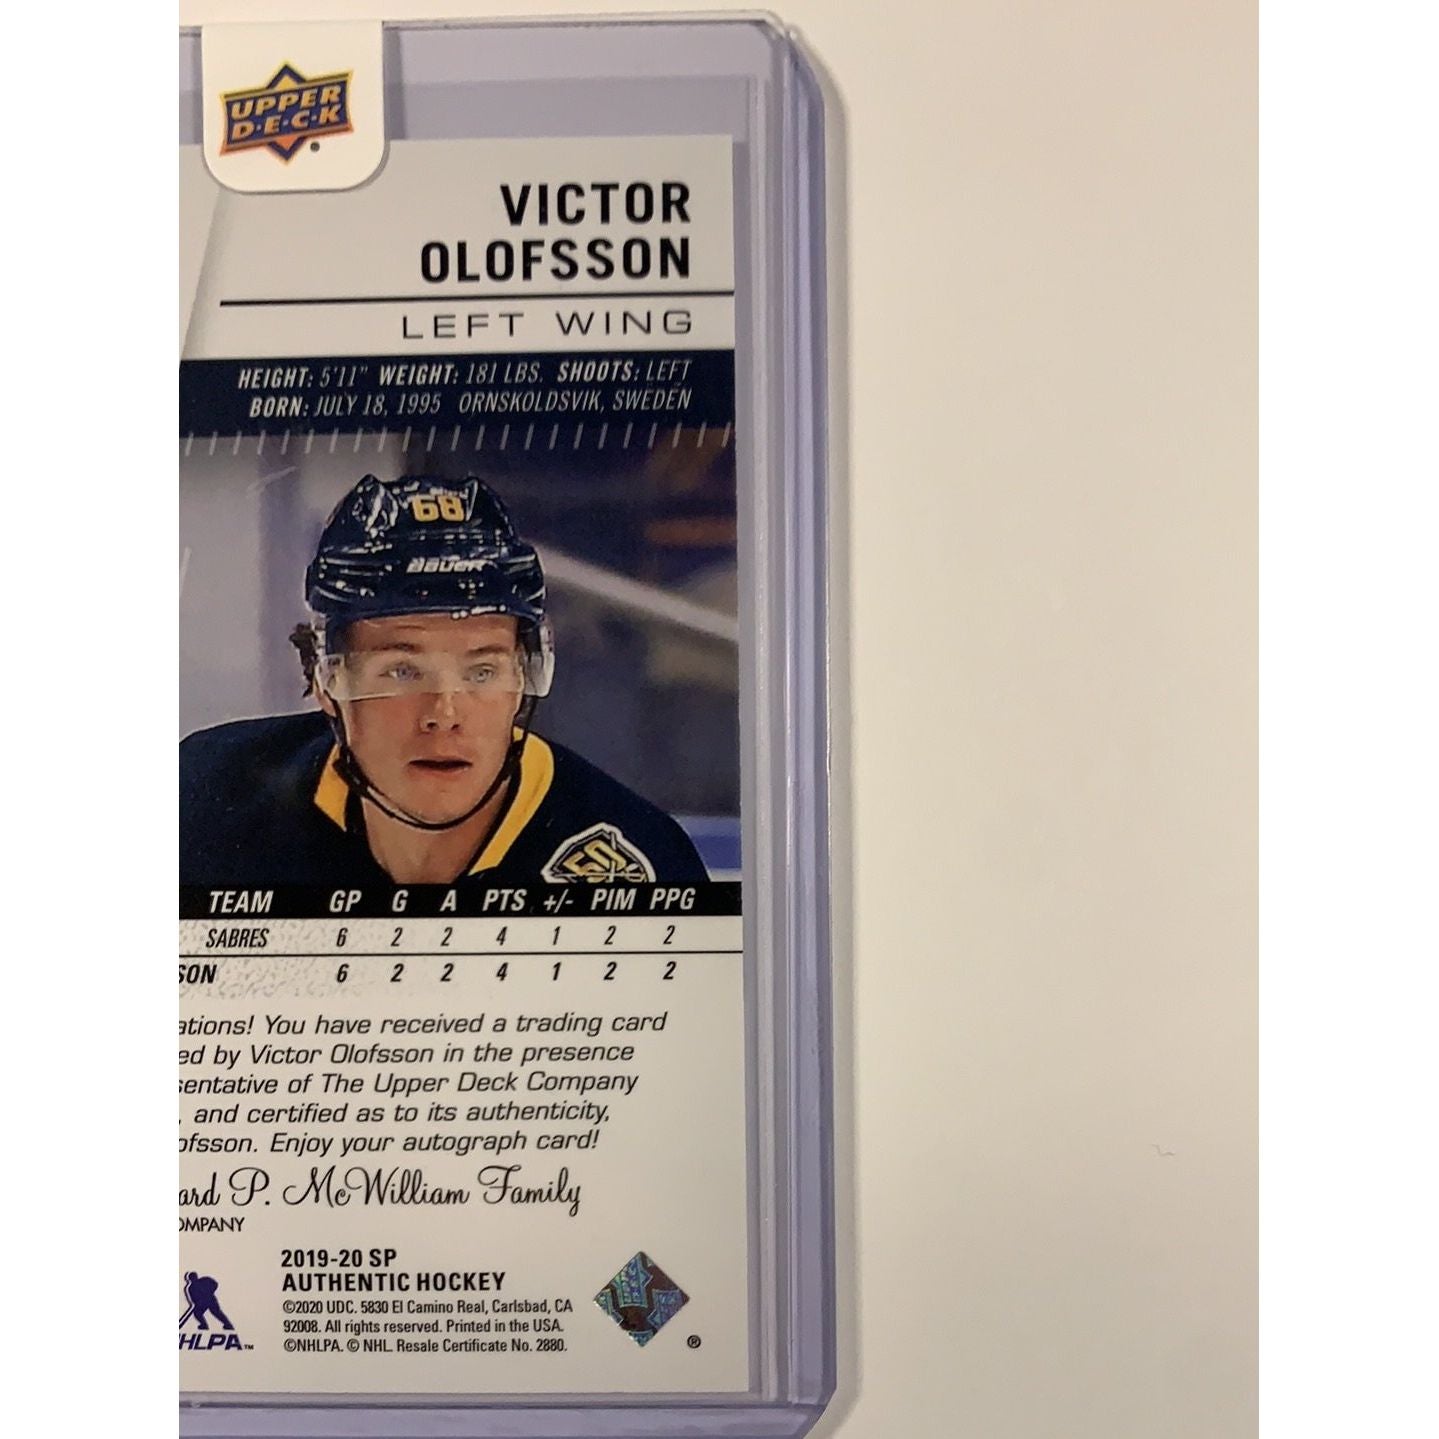  2019-20 SP Authentic Victor Olofsson Future Watch Auto /999  Local Legends Cards & Collectibles